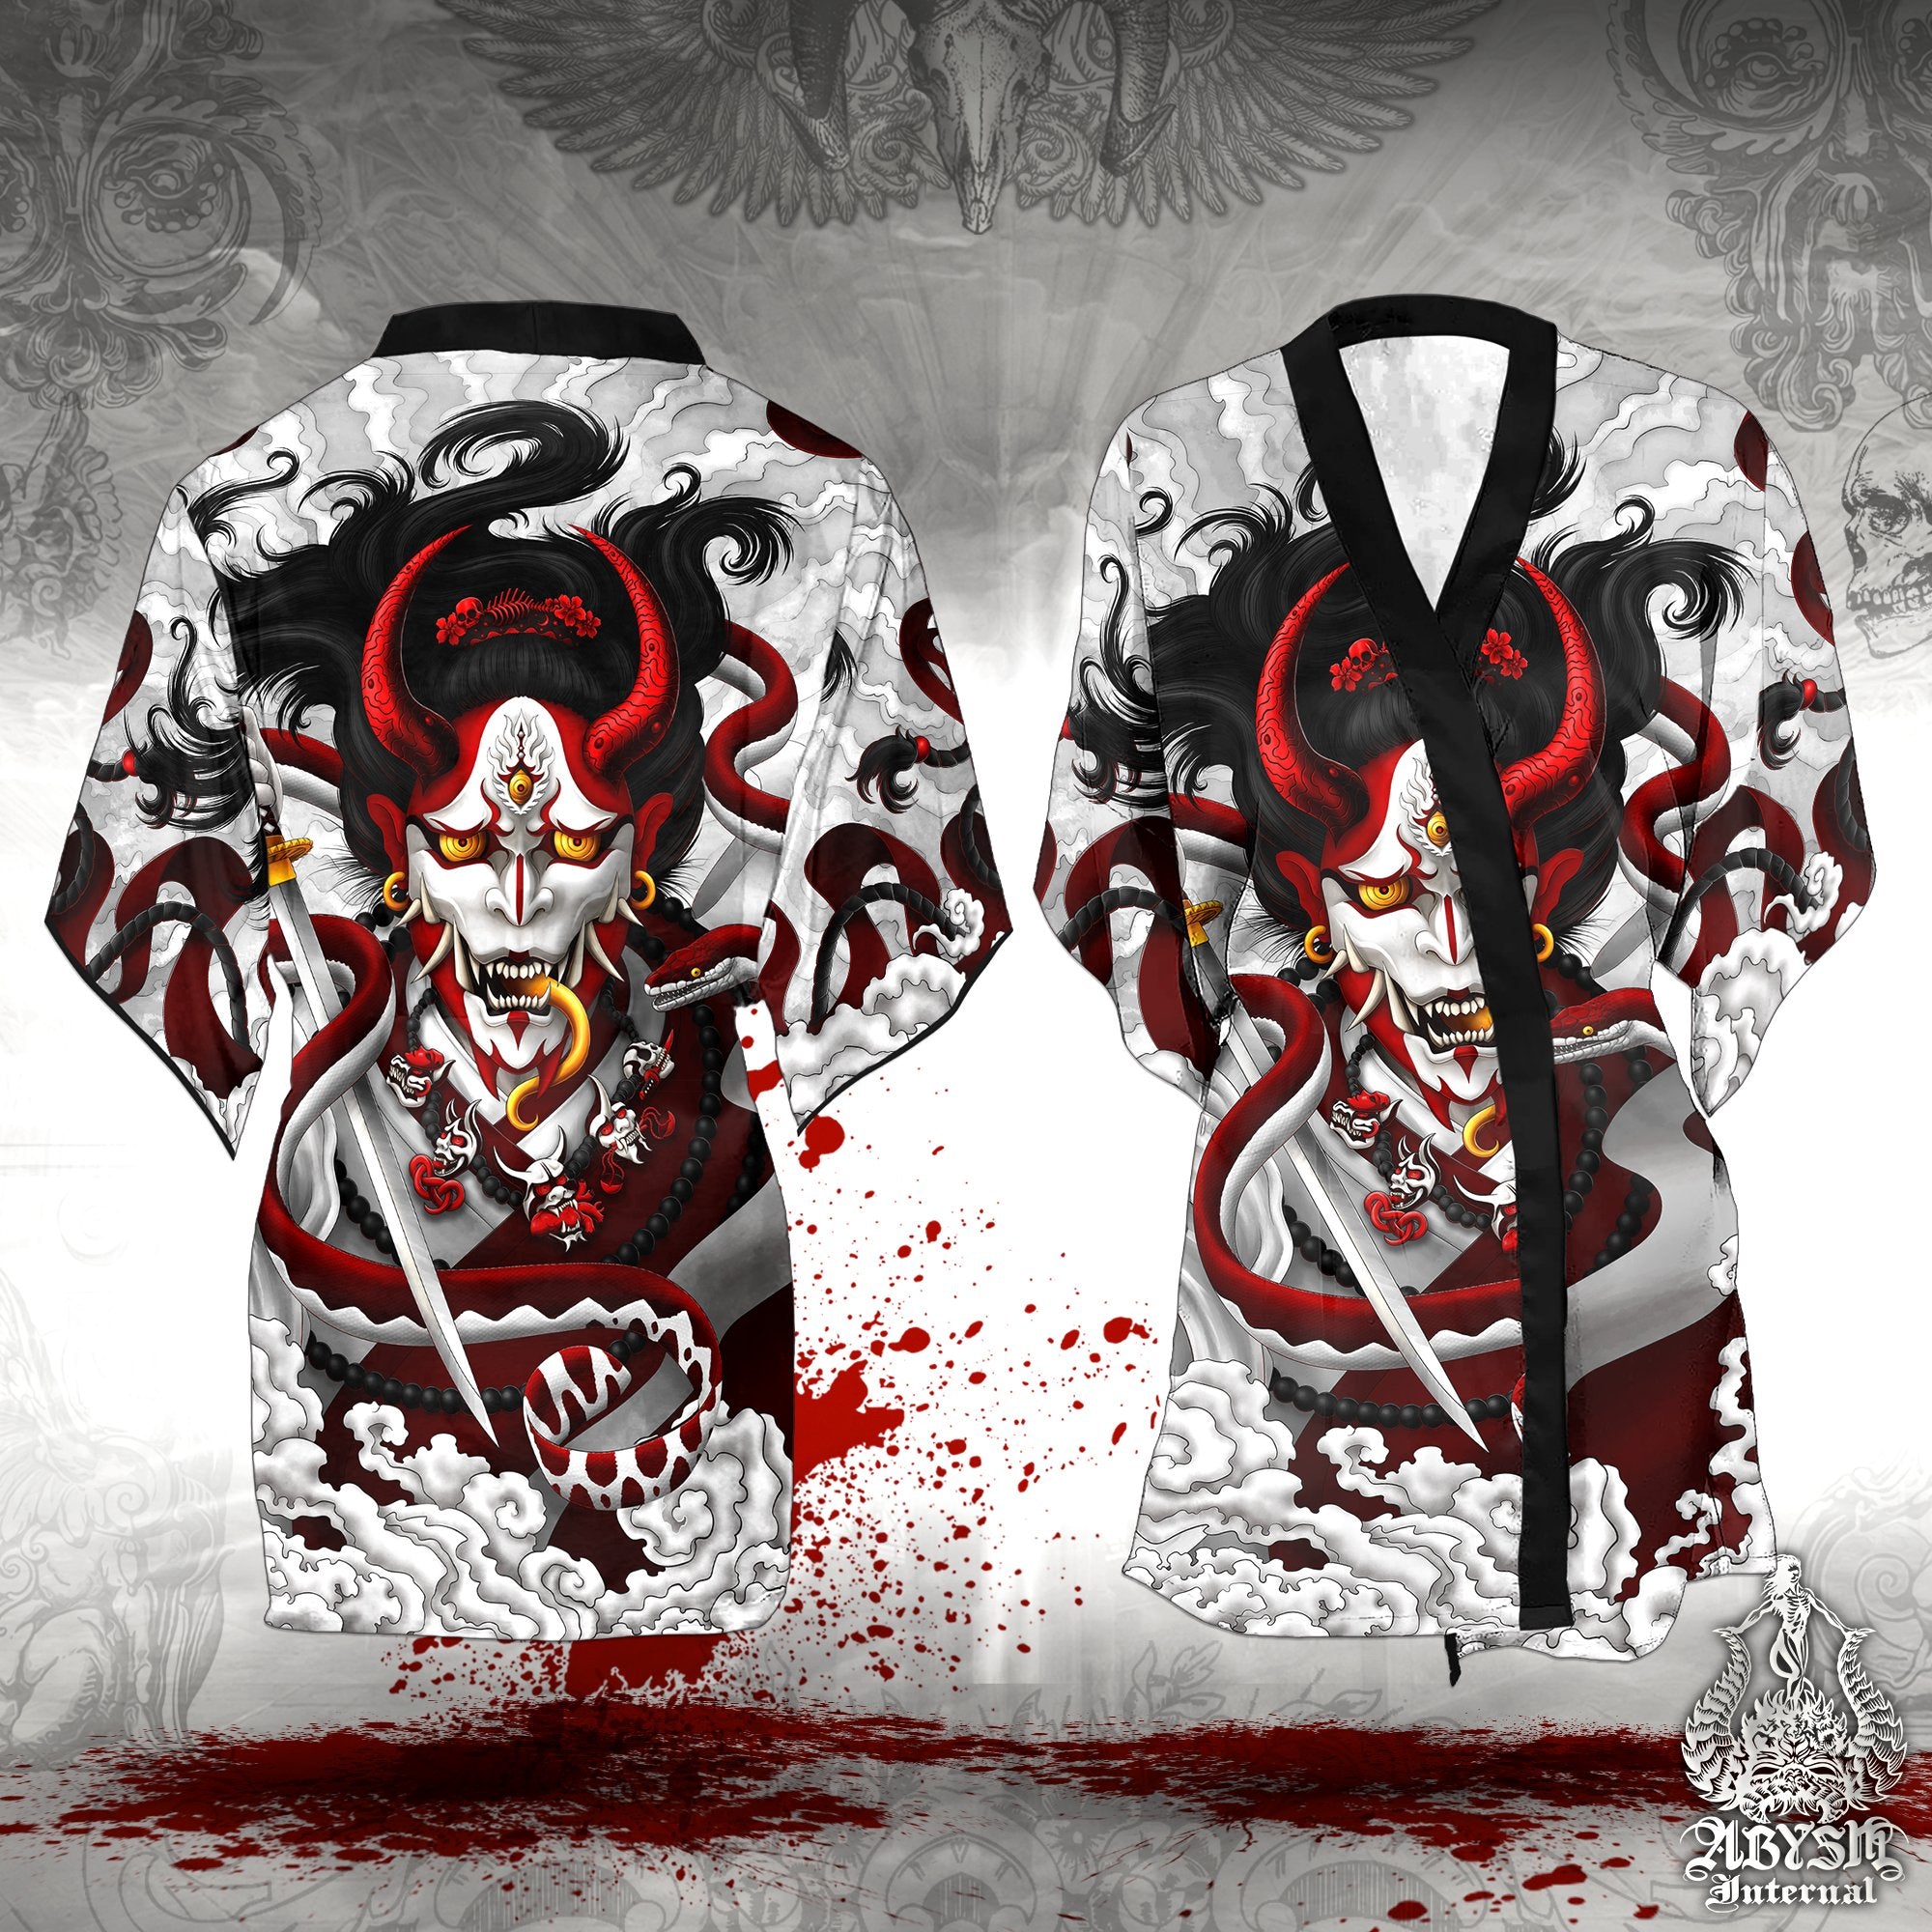 Hannya Short Kimono Robe, Beach Party Outfit, White and Red Oni Coverup, Japanese Demon Art, Summer Festival, Alternative Clothing, Unisex - Snake, Bloody Goth - Abysm Internal